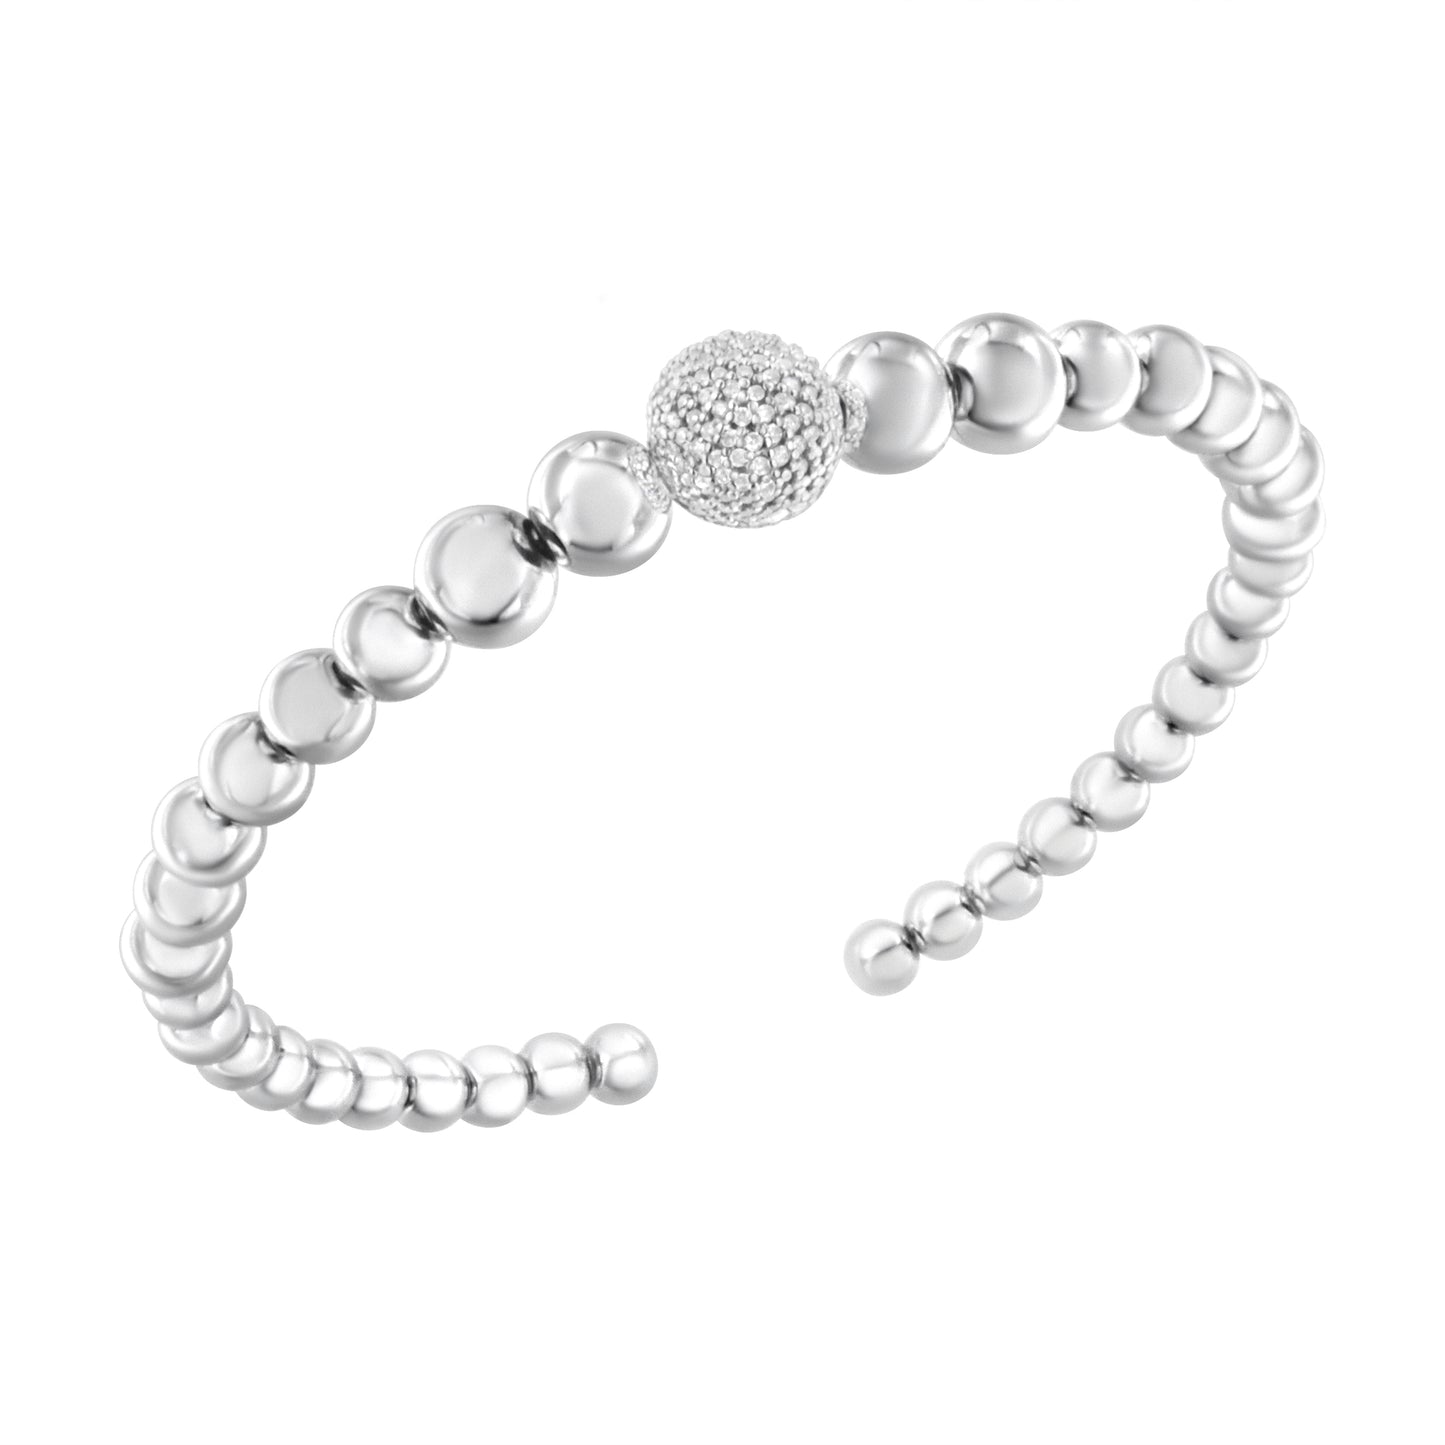 1/6 cttw Diamond Rondelle Graduated Ball Bead Cuff Bangle Bracelet in Sterling Silver